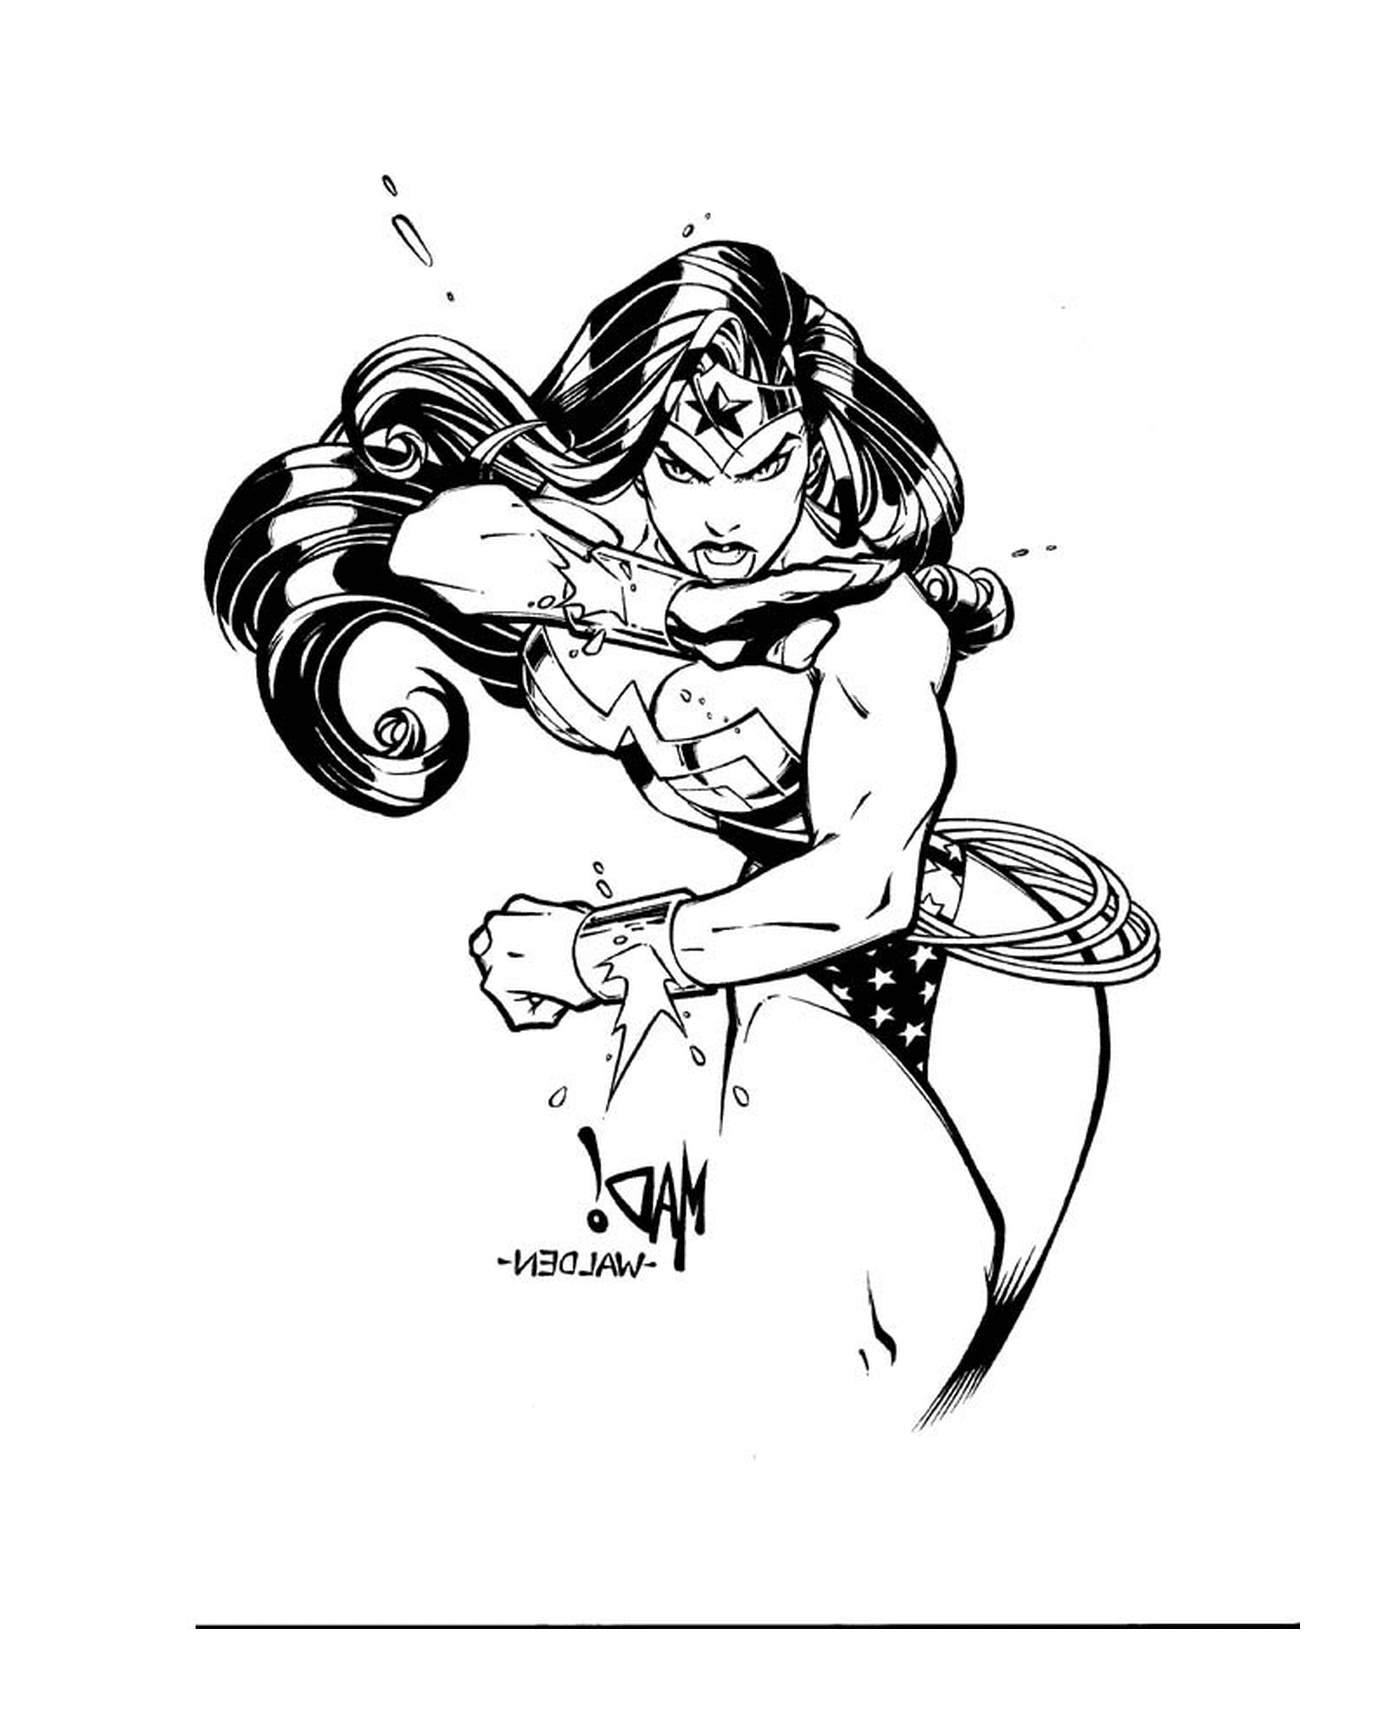  Wonder Woman created by Walden Wong 